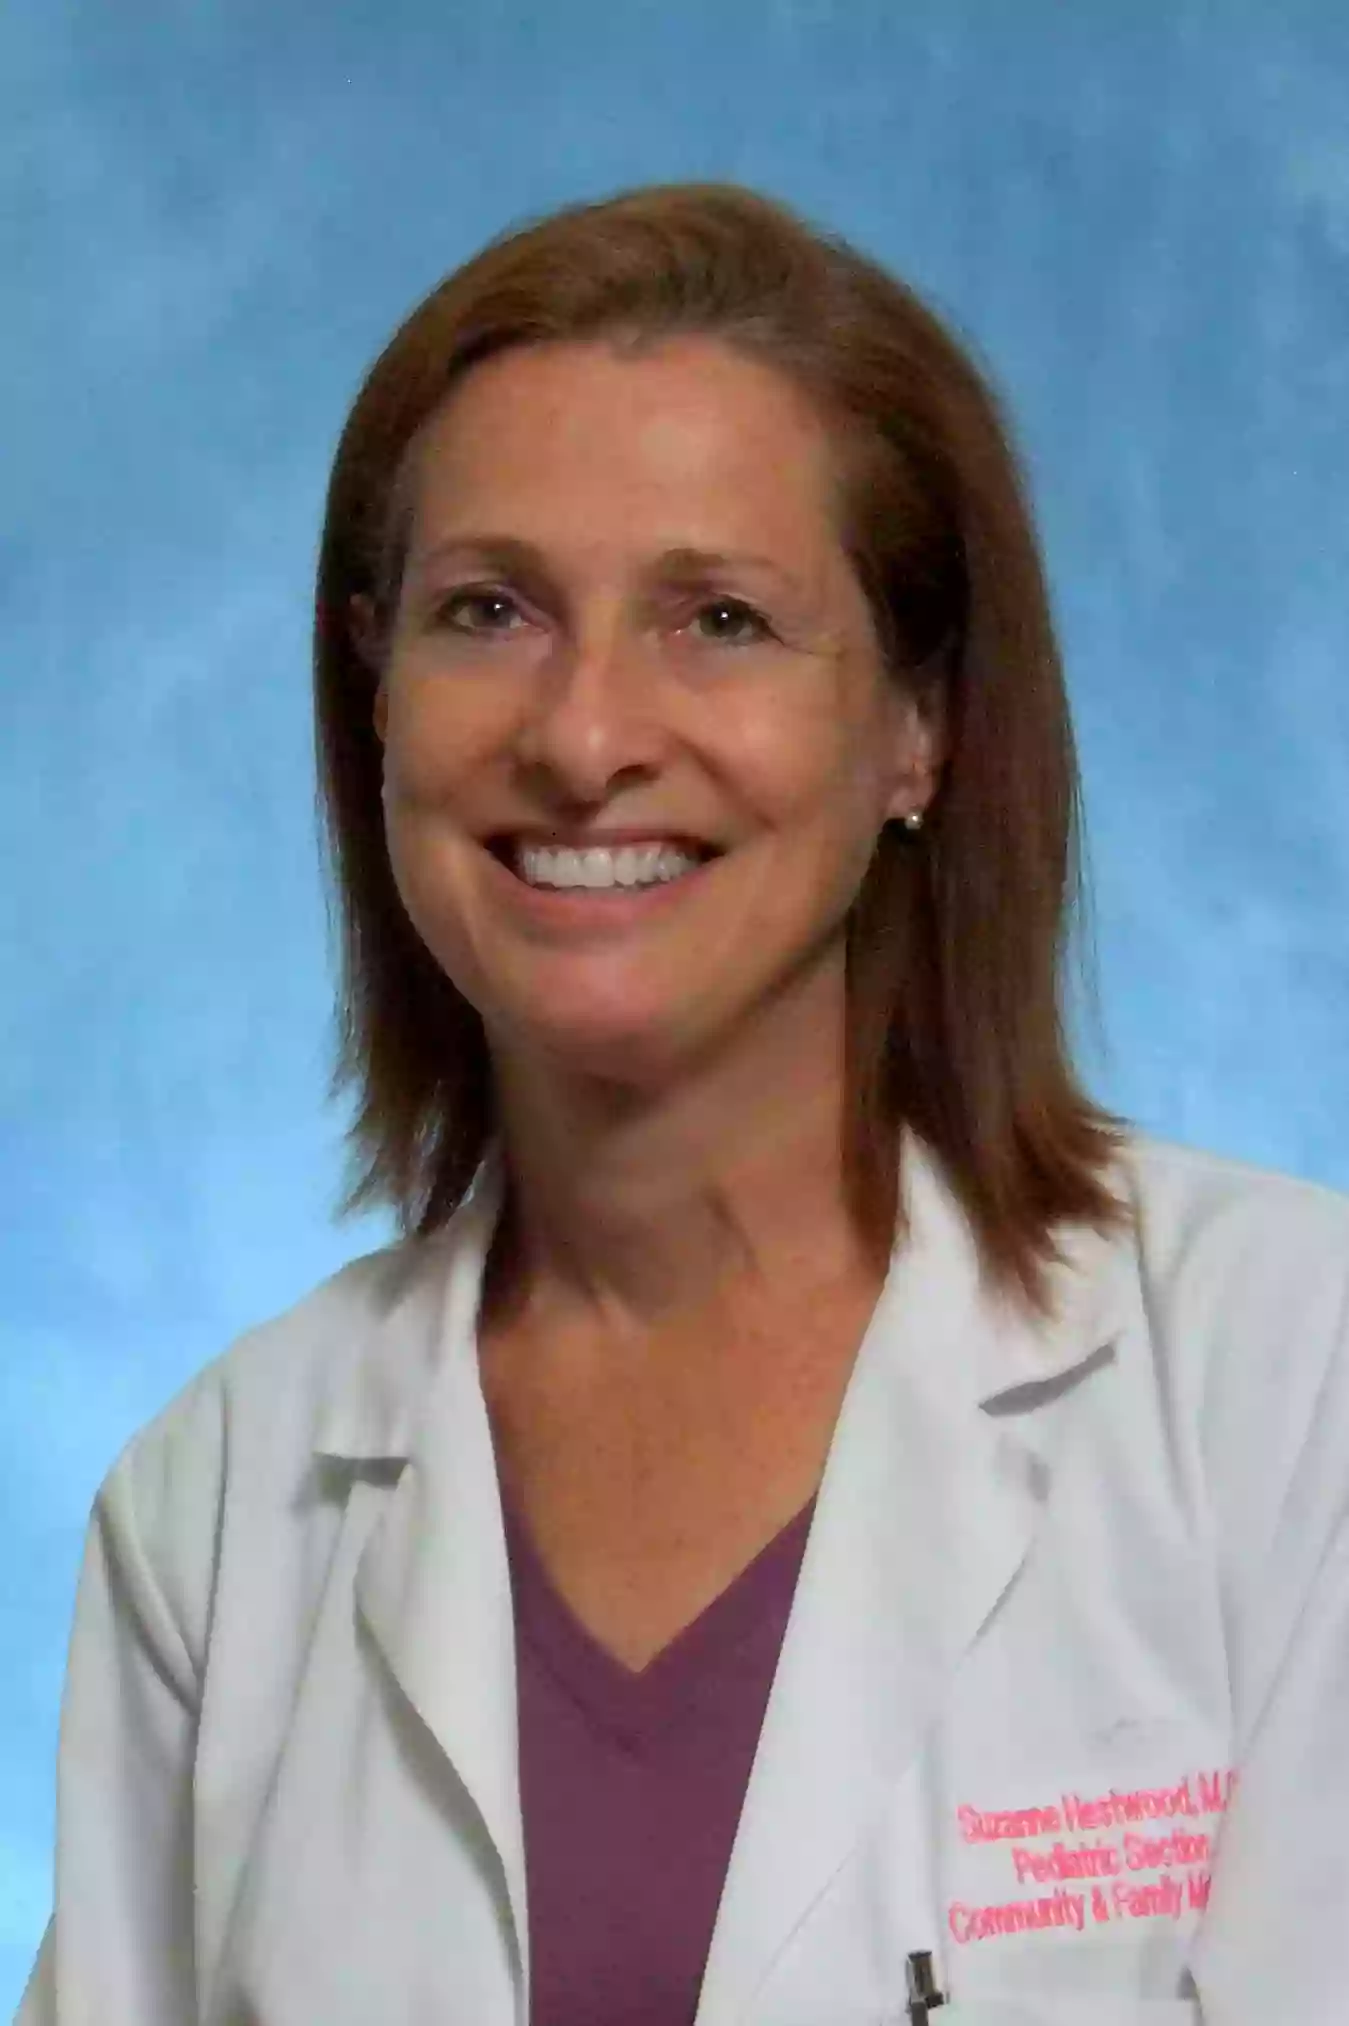 Suzanne M. Hestwood, MD